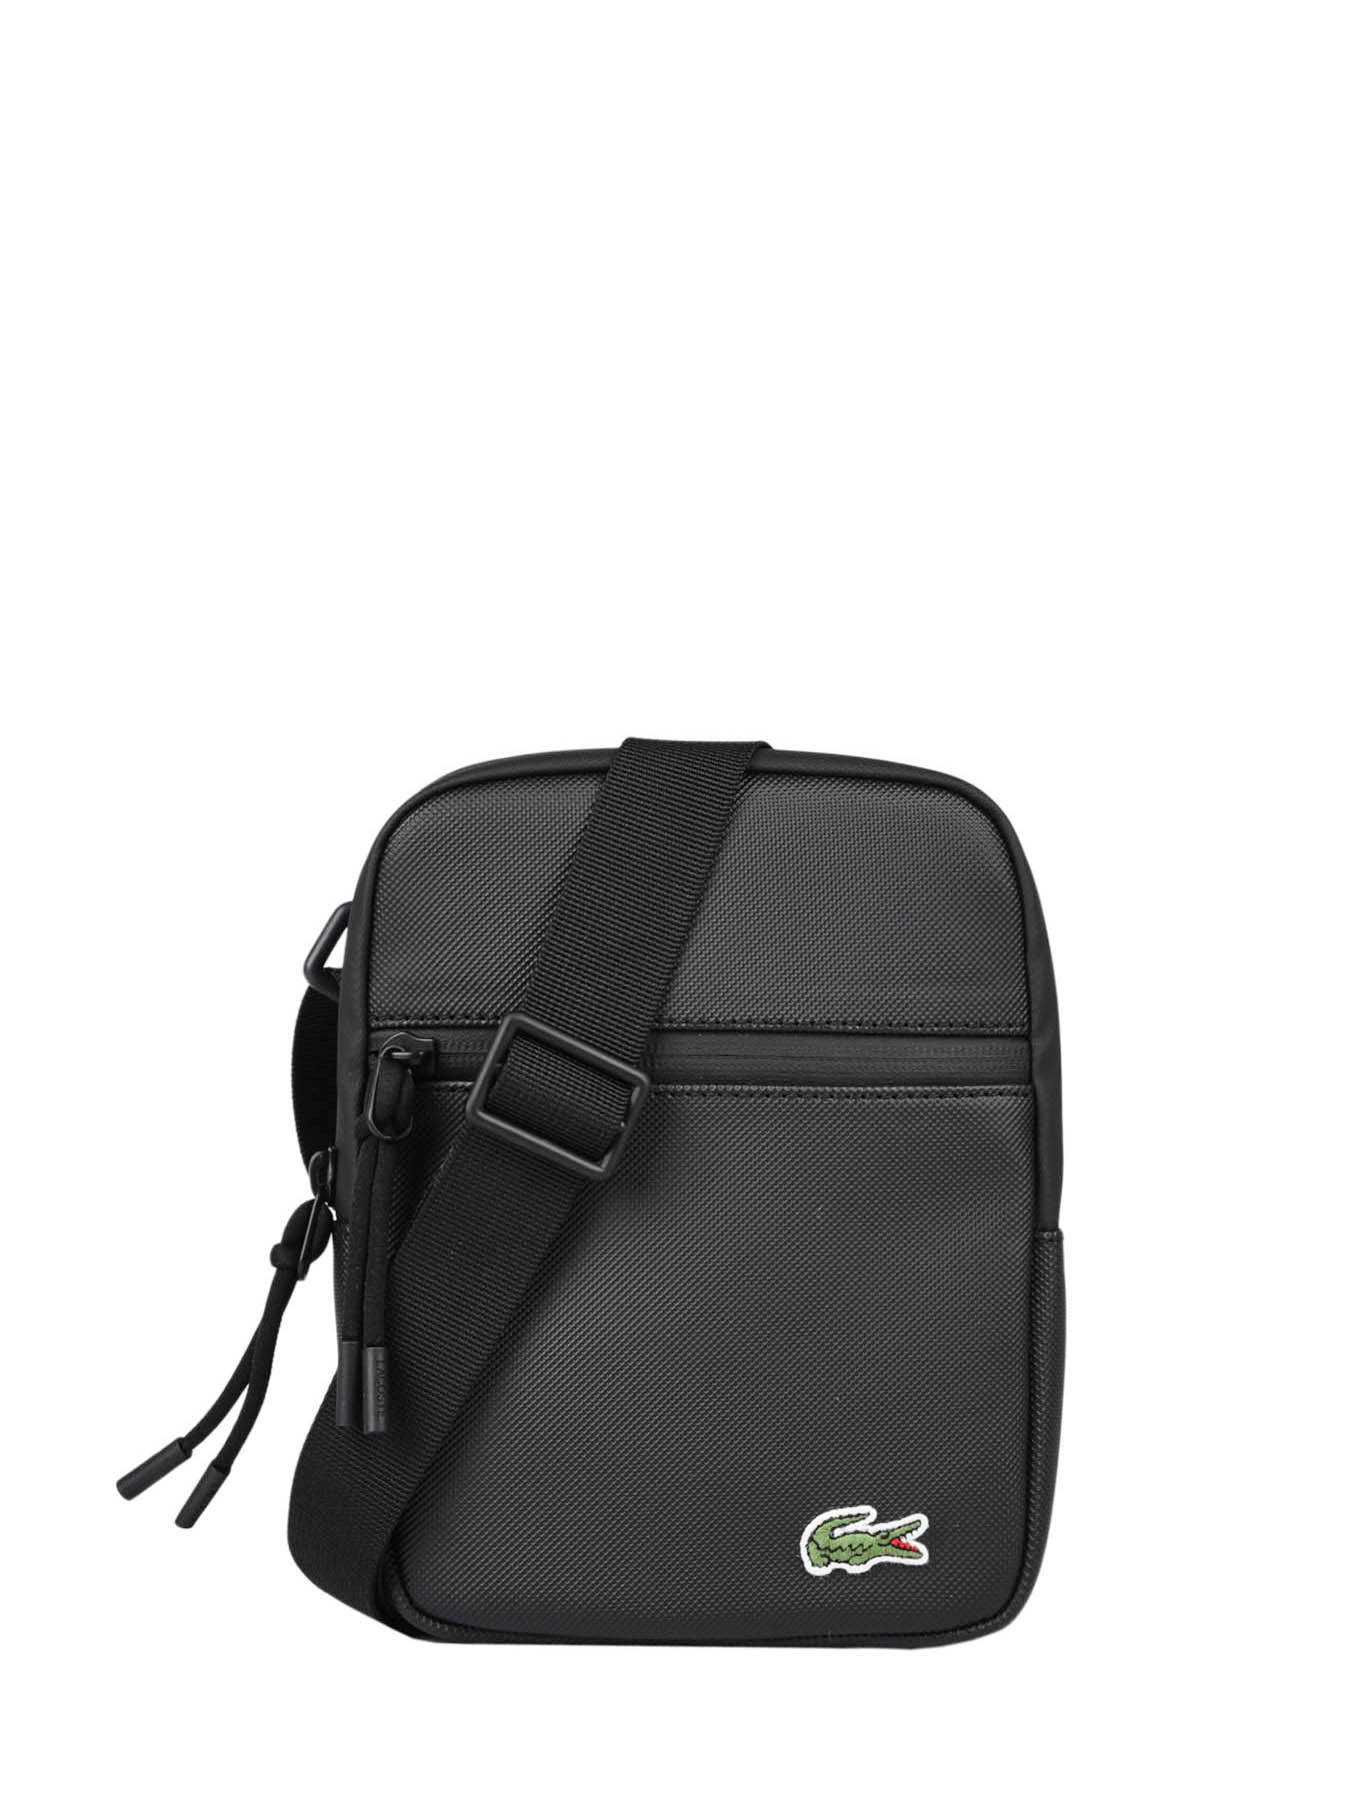 Lacoste Crossbody bag NH3307LV - best prices